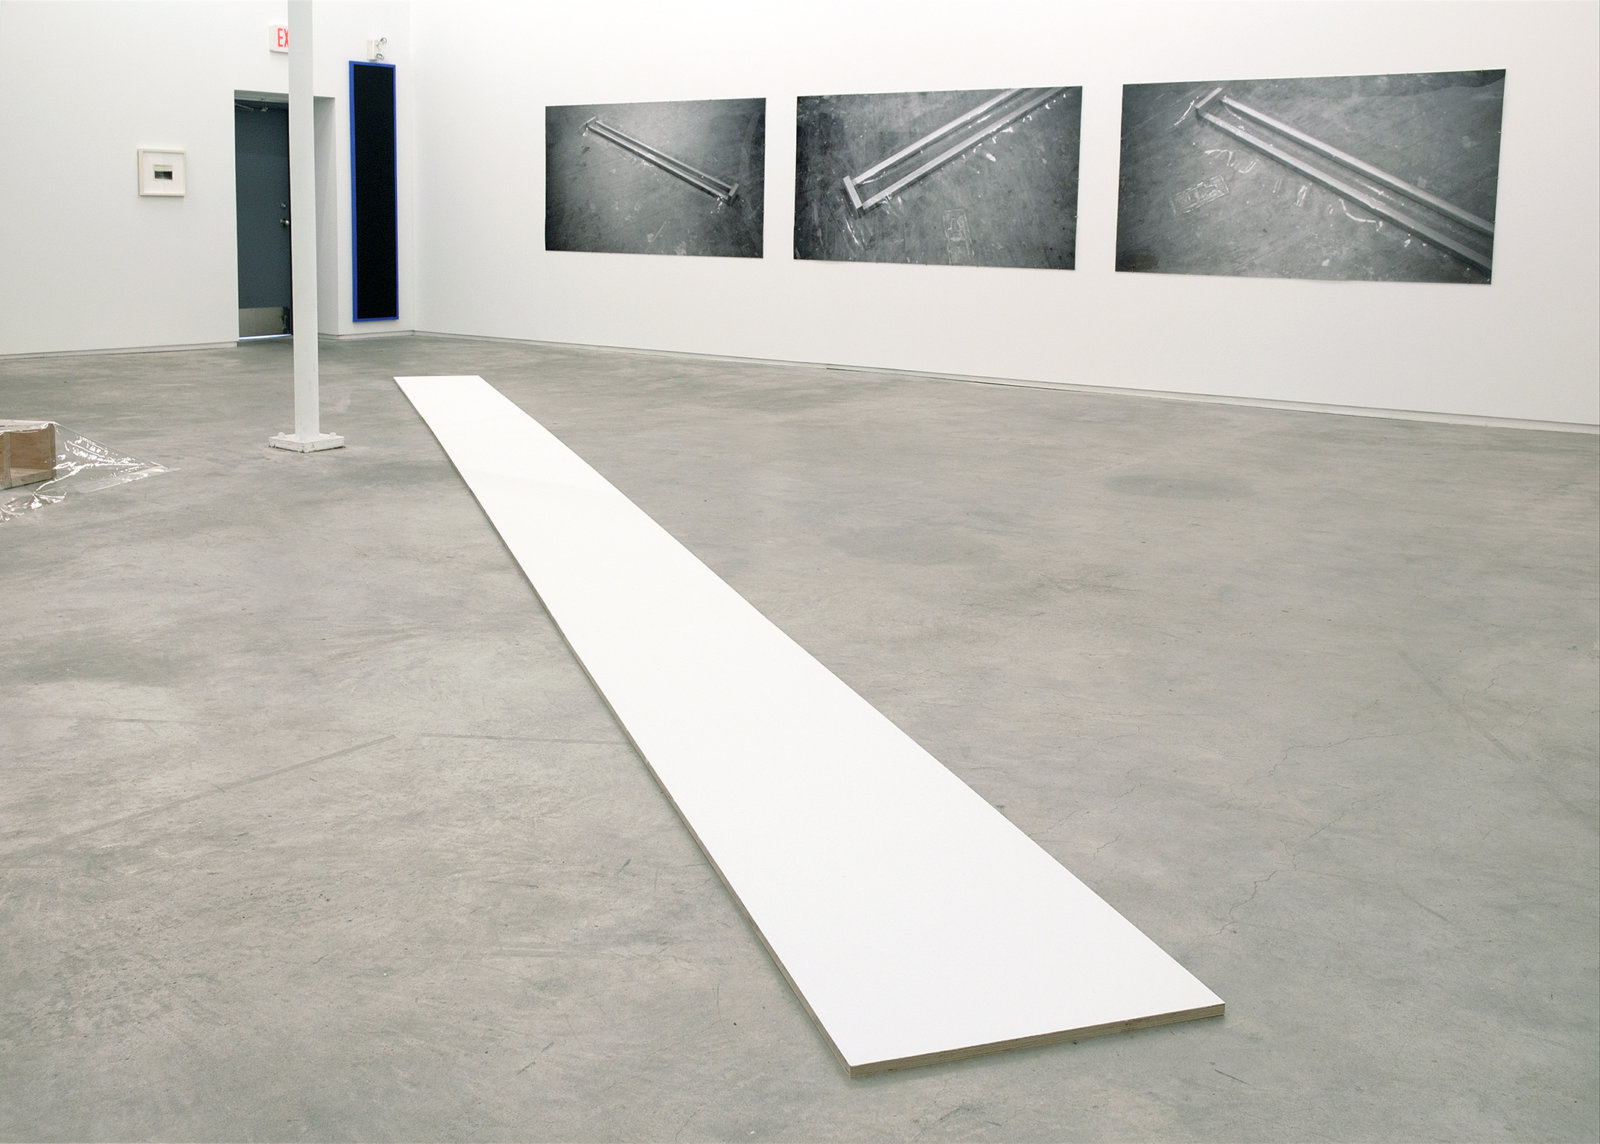 Ian Wallace, Untitled (White Line), 1969–2007, acrylic on plywood, 1 x 384 x 24 in. (1 x 975 x 61 cm)